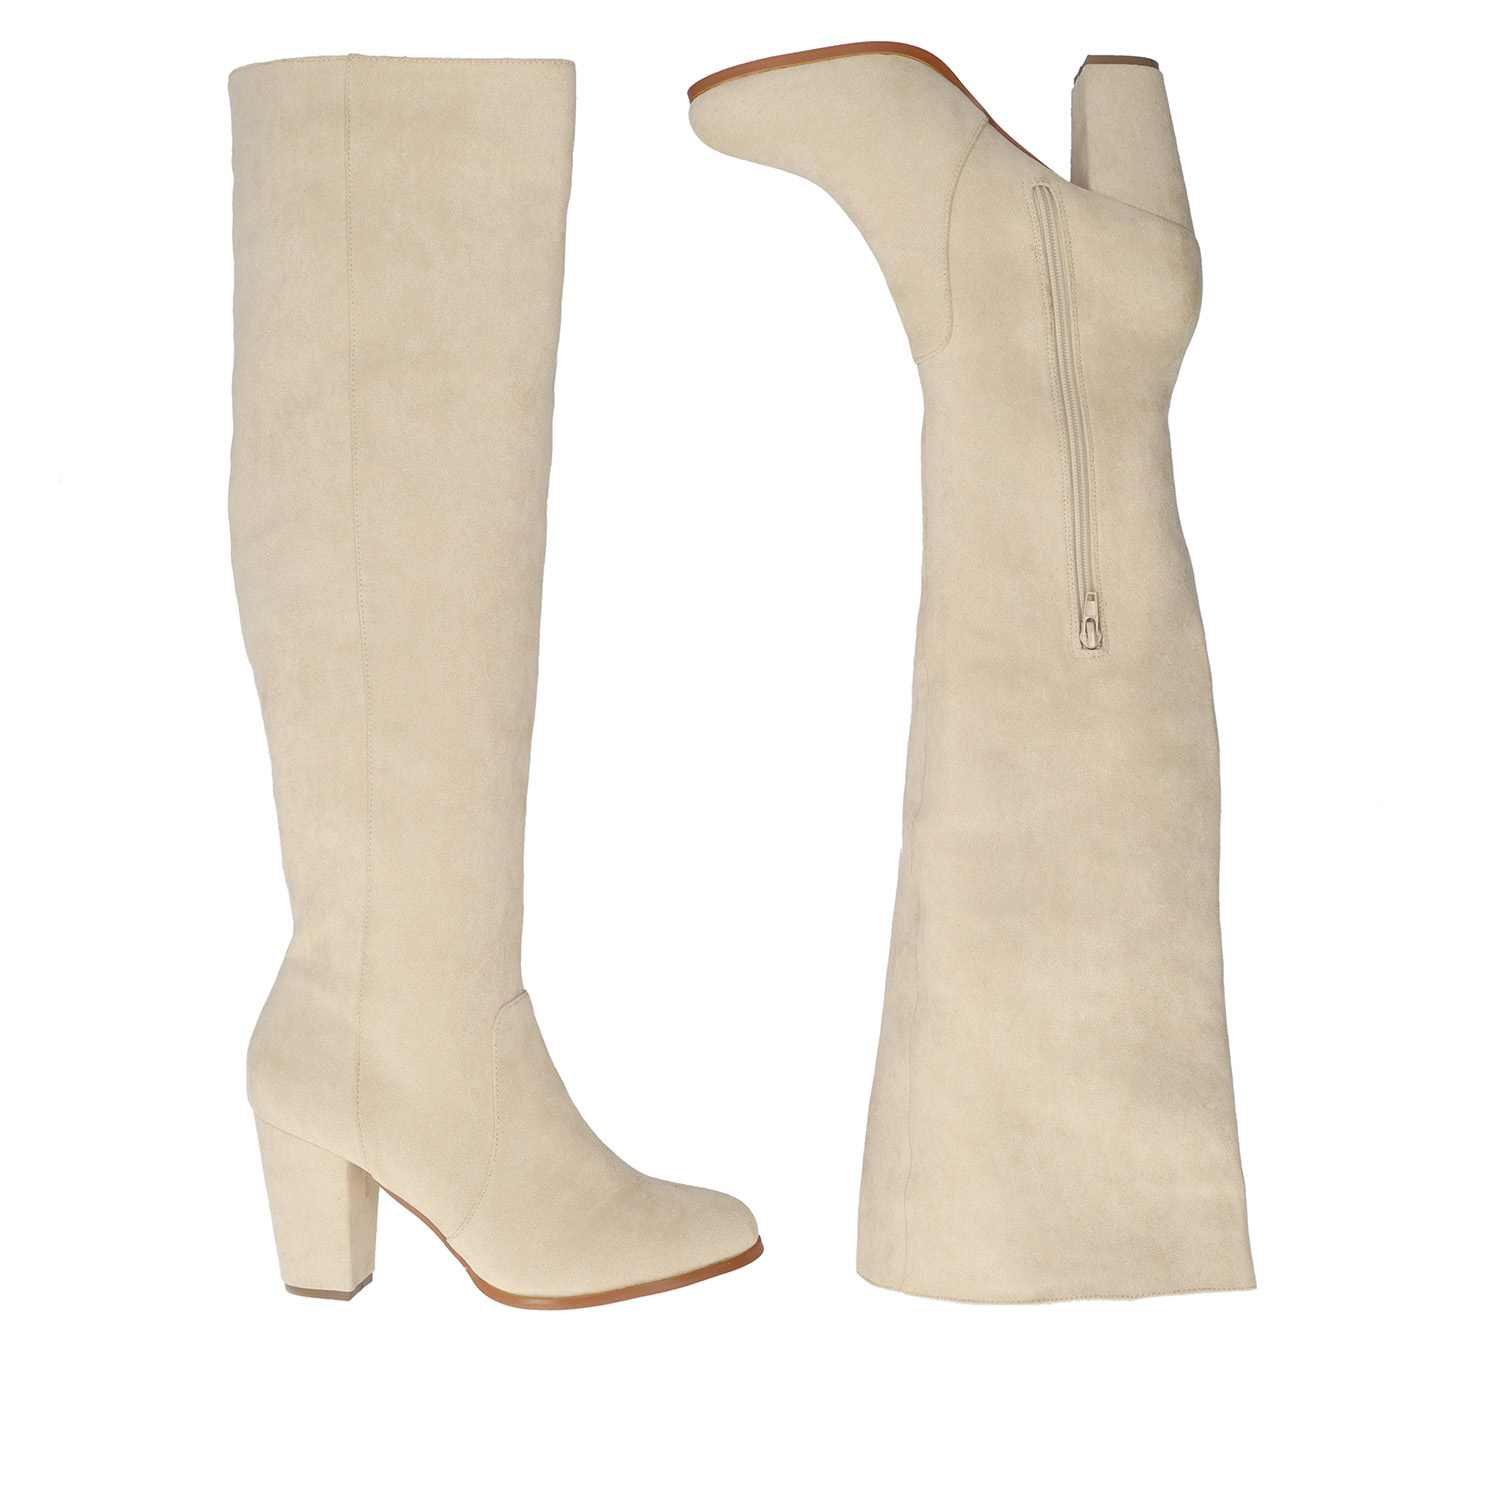 Heeled knee-high boots in off-white faux suede. 